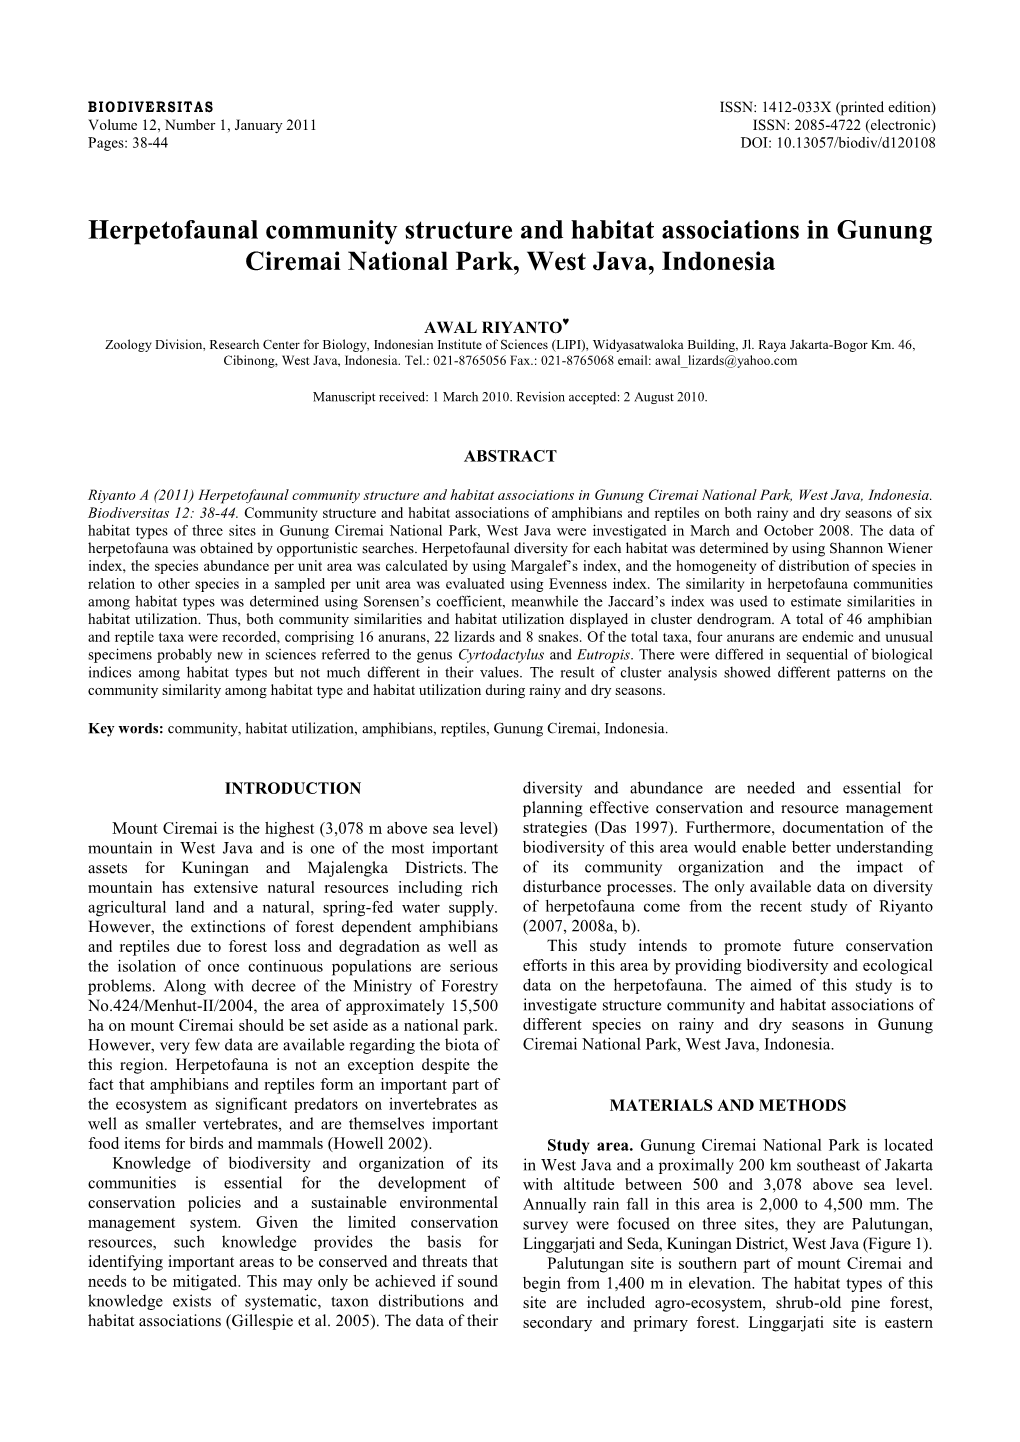 Herpetofaunal Community Structure and Habitat Associations in Gunung Ciremai National Park, West Java, Indonesia